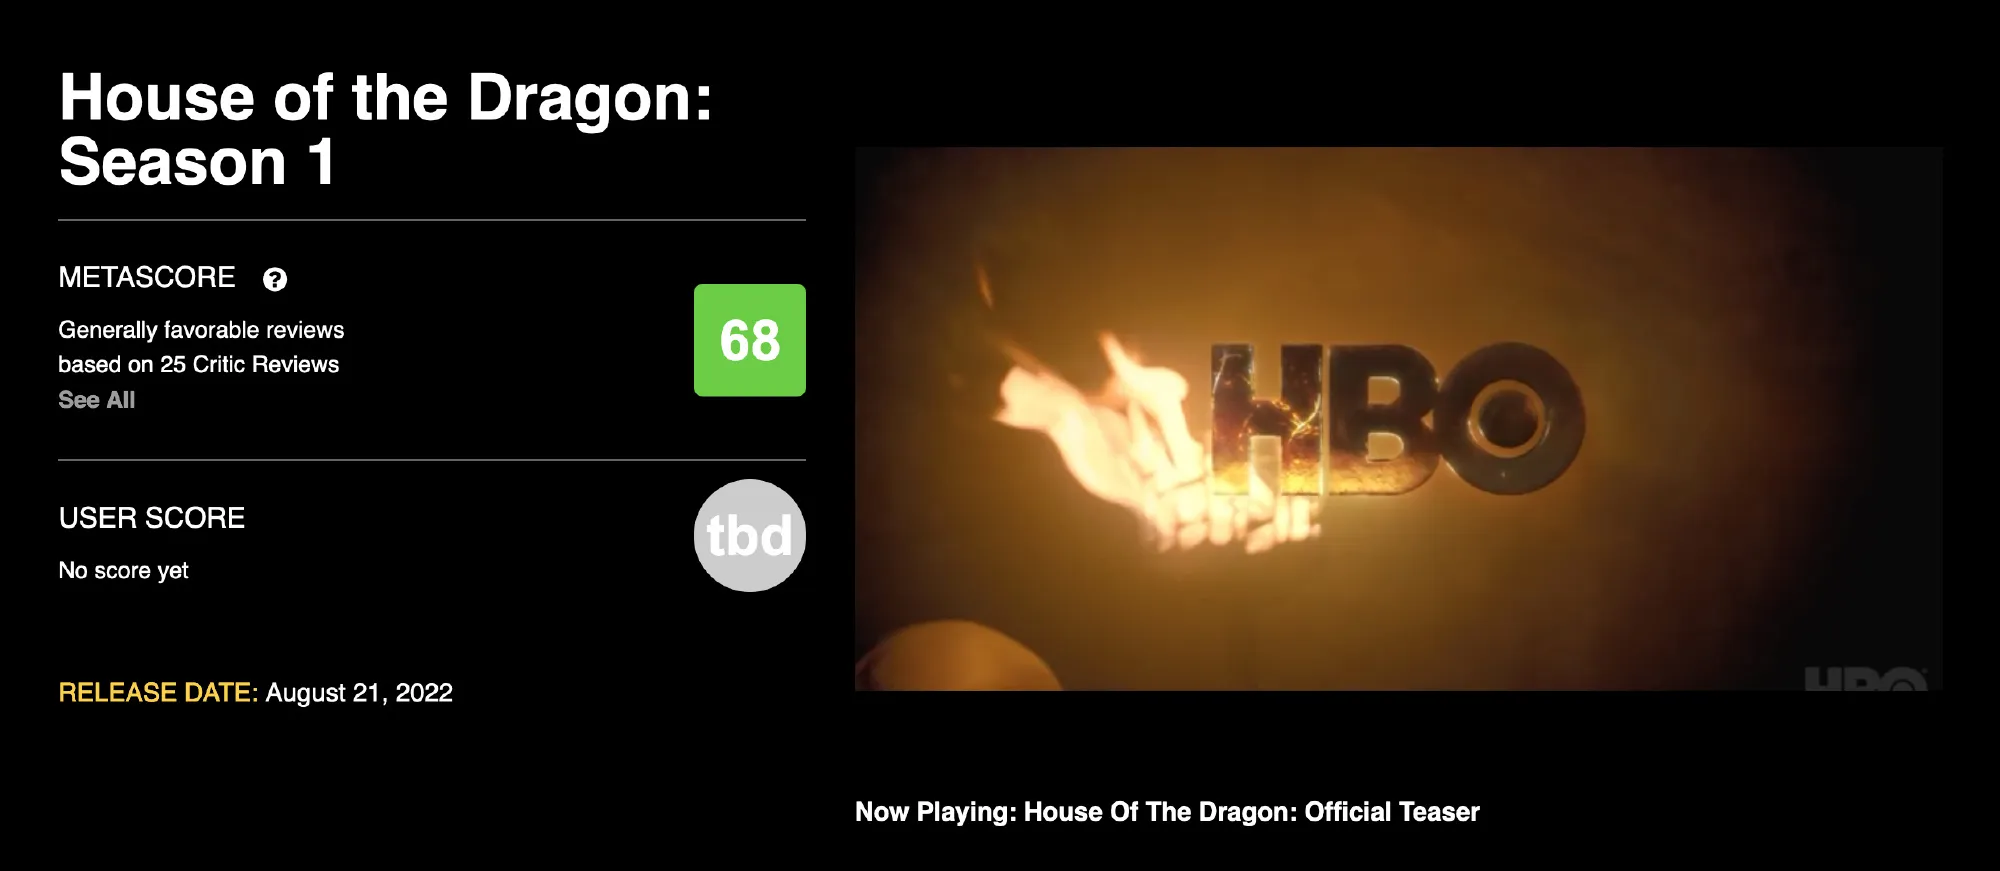 'House of the Dragon' Rotten Tomatoes is 75% fresh, with an average MTC score of 68 | FMV6